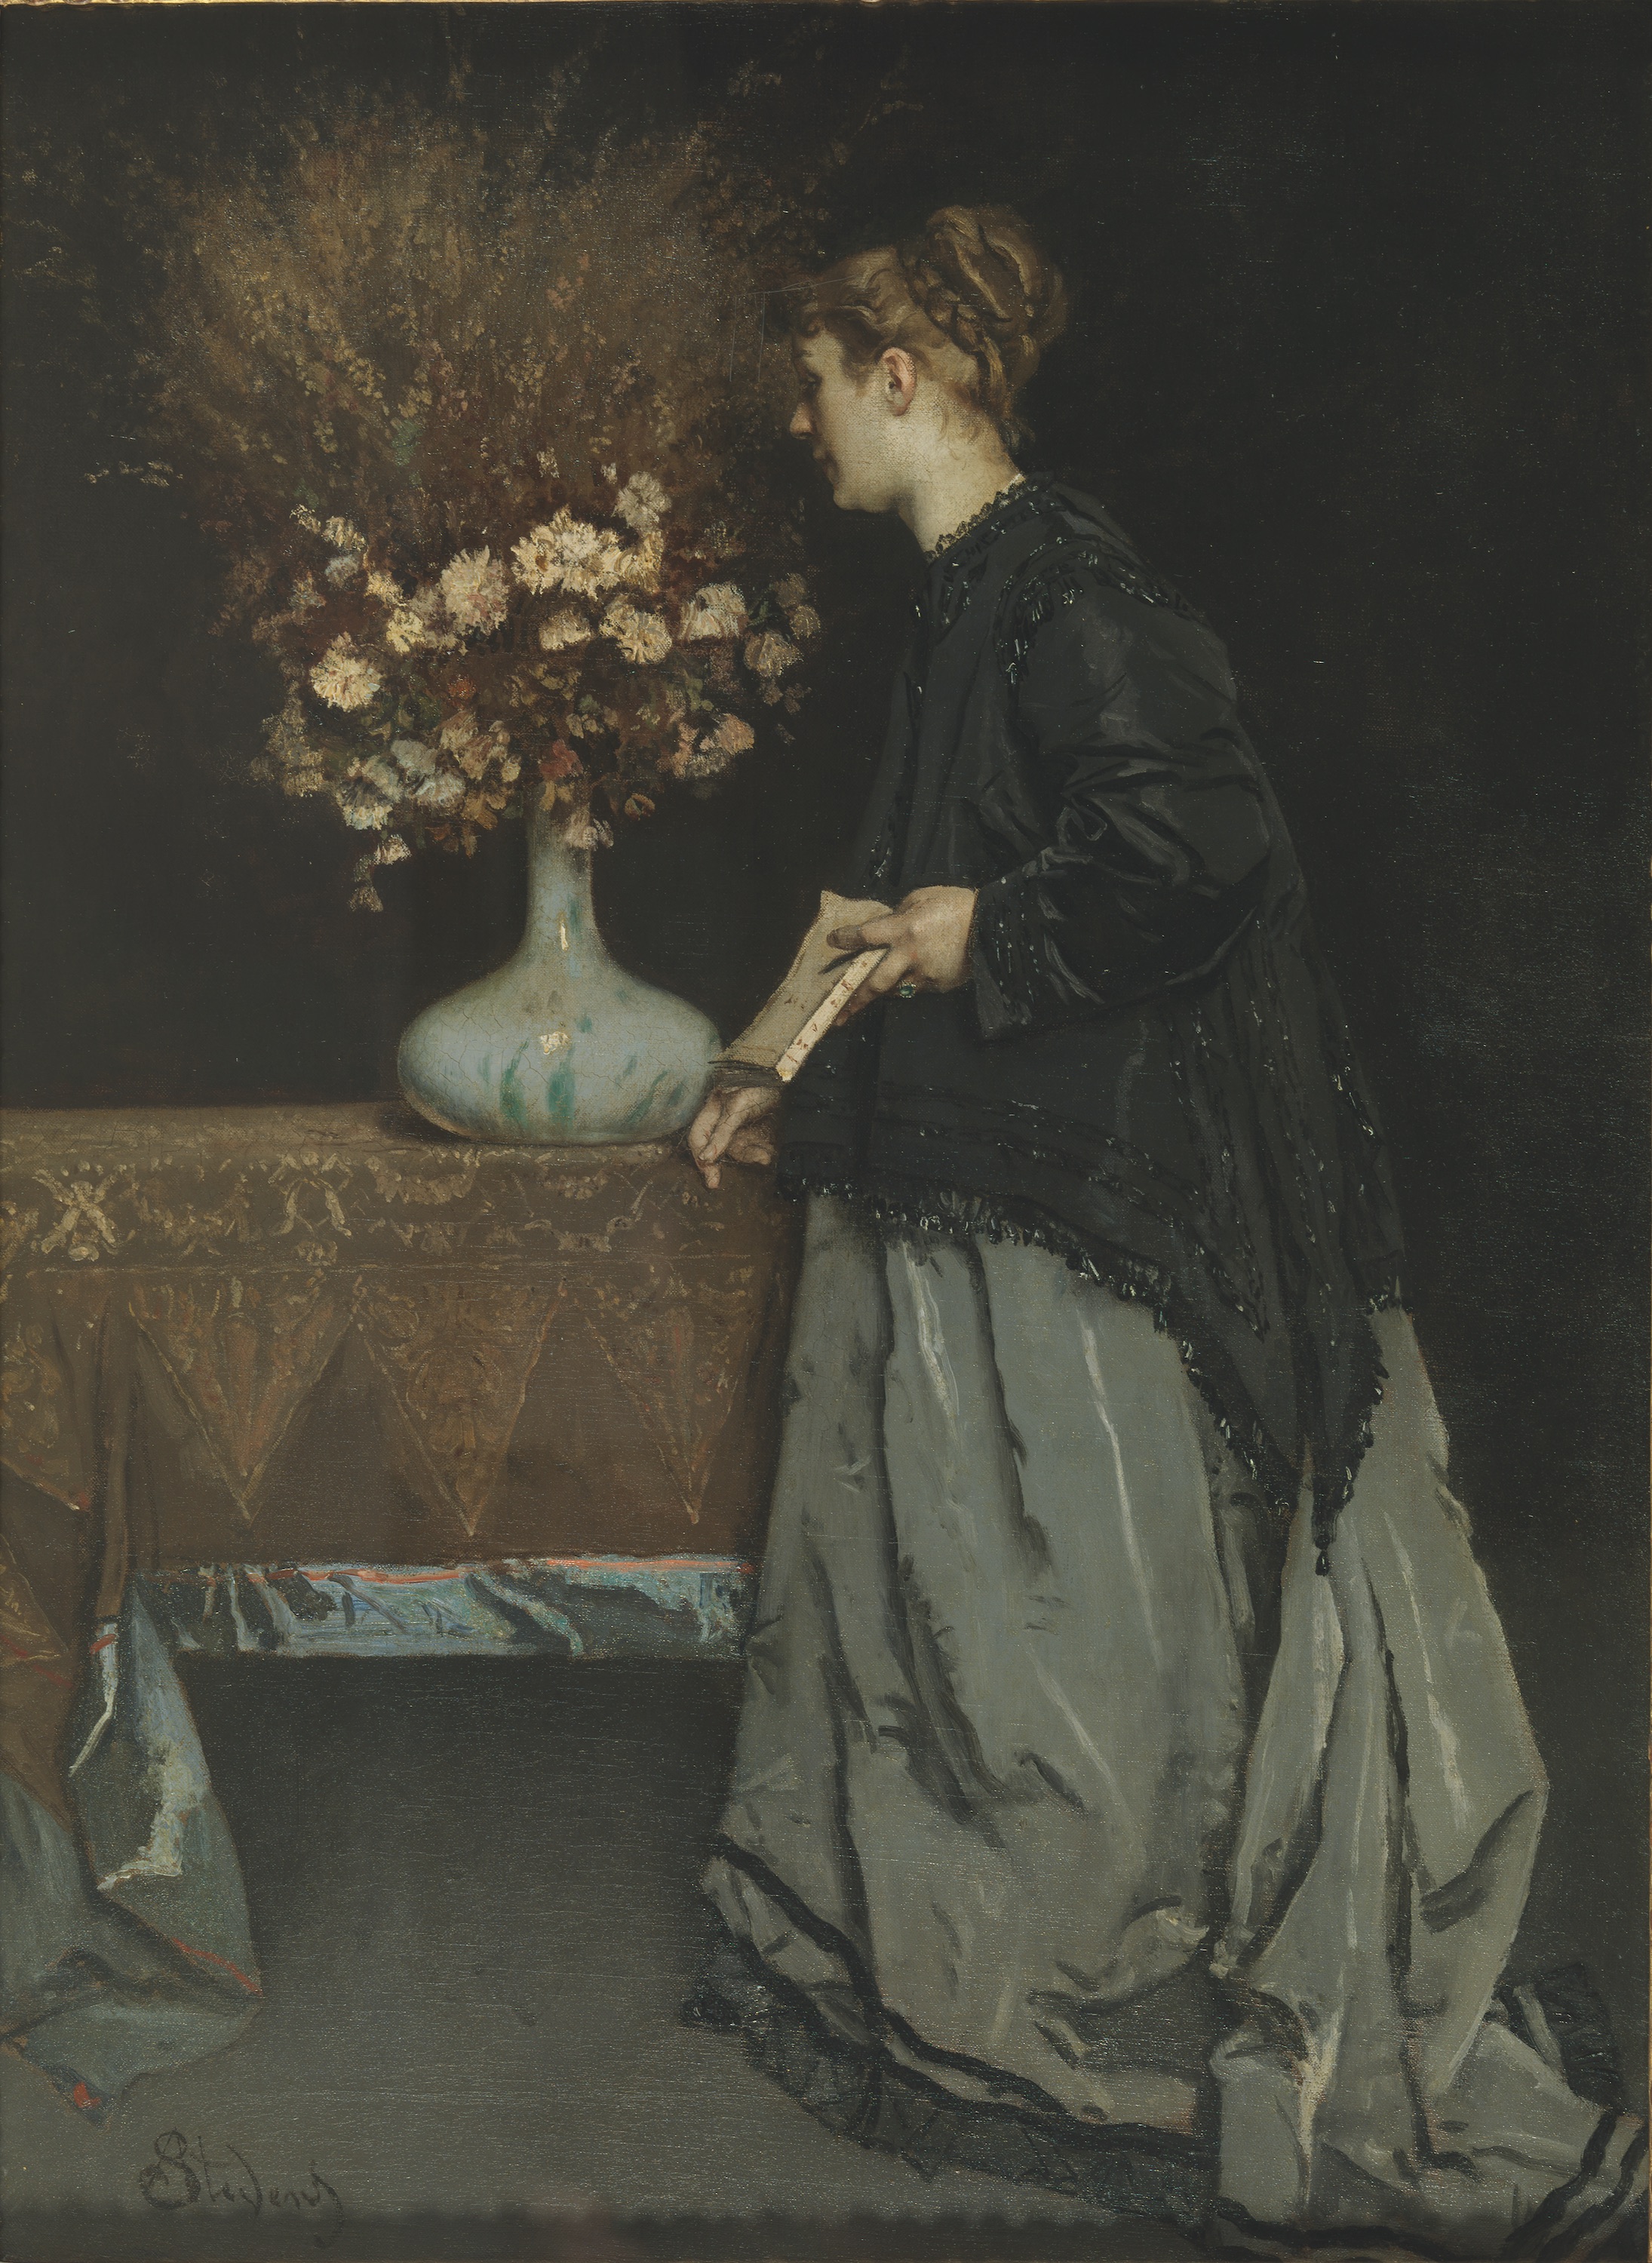 Autumn Flowers by Alfred Stevens - 1867 - 74.5 x 55 cm The Royal Museums of Fine Arts of Belgium